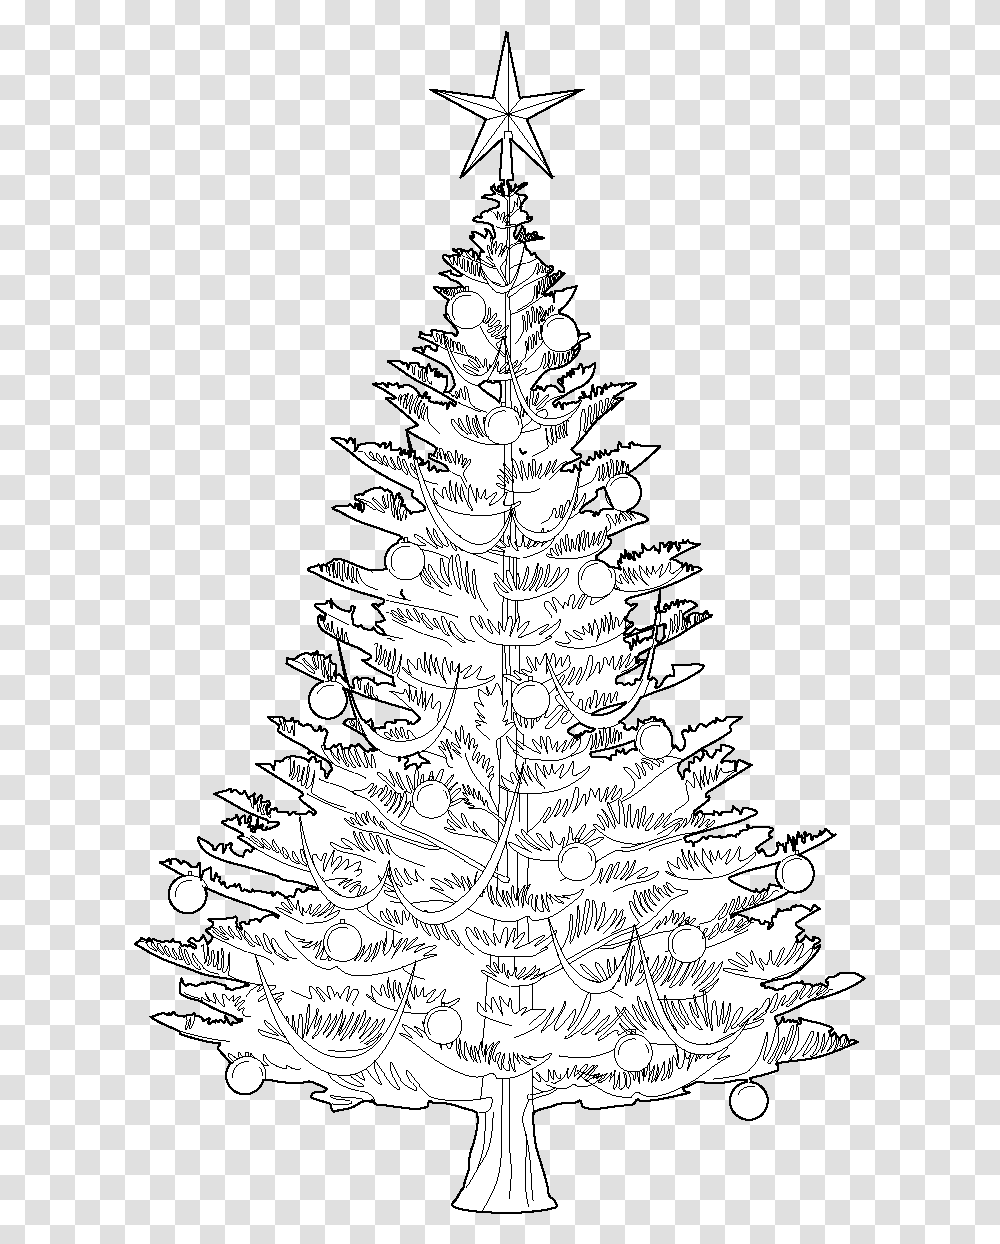 Dashing Vector Images Christmas Tree Cad Block, Plant, Ornament, Pine, Stencil Transparent Png